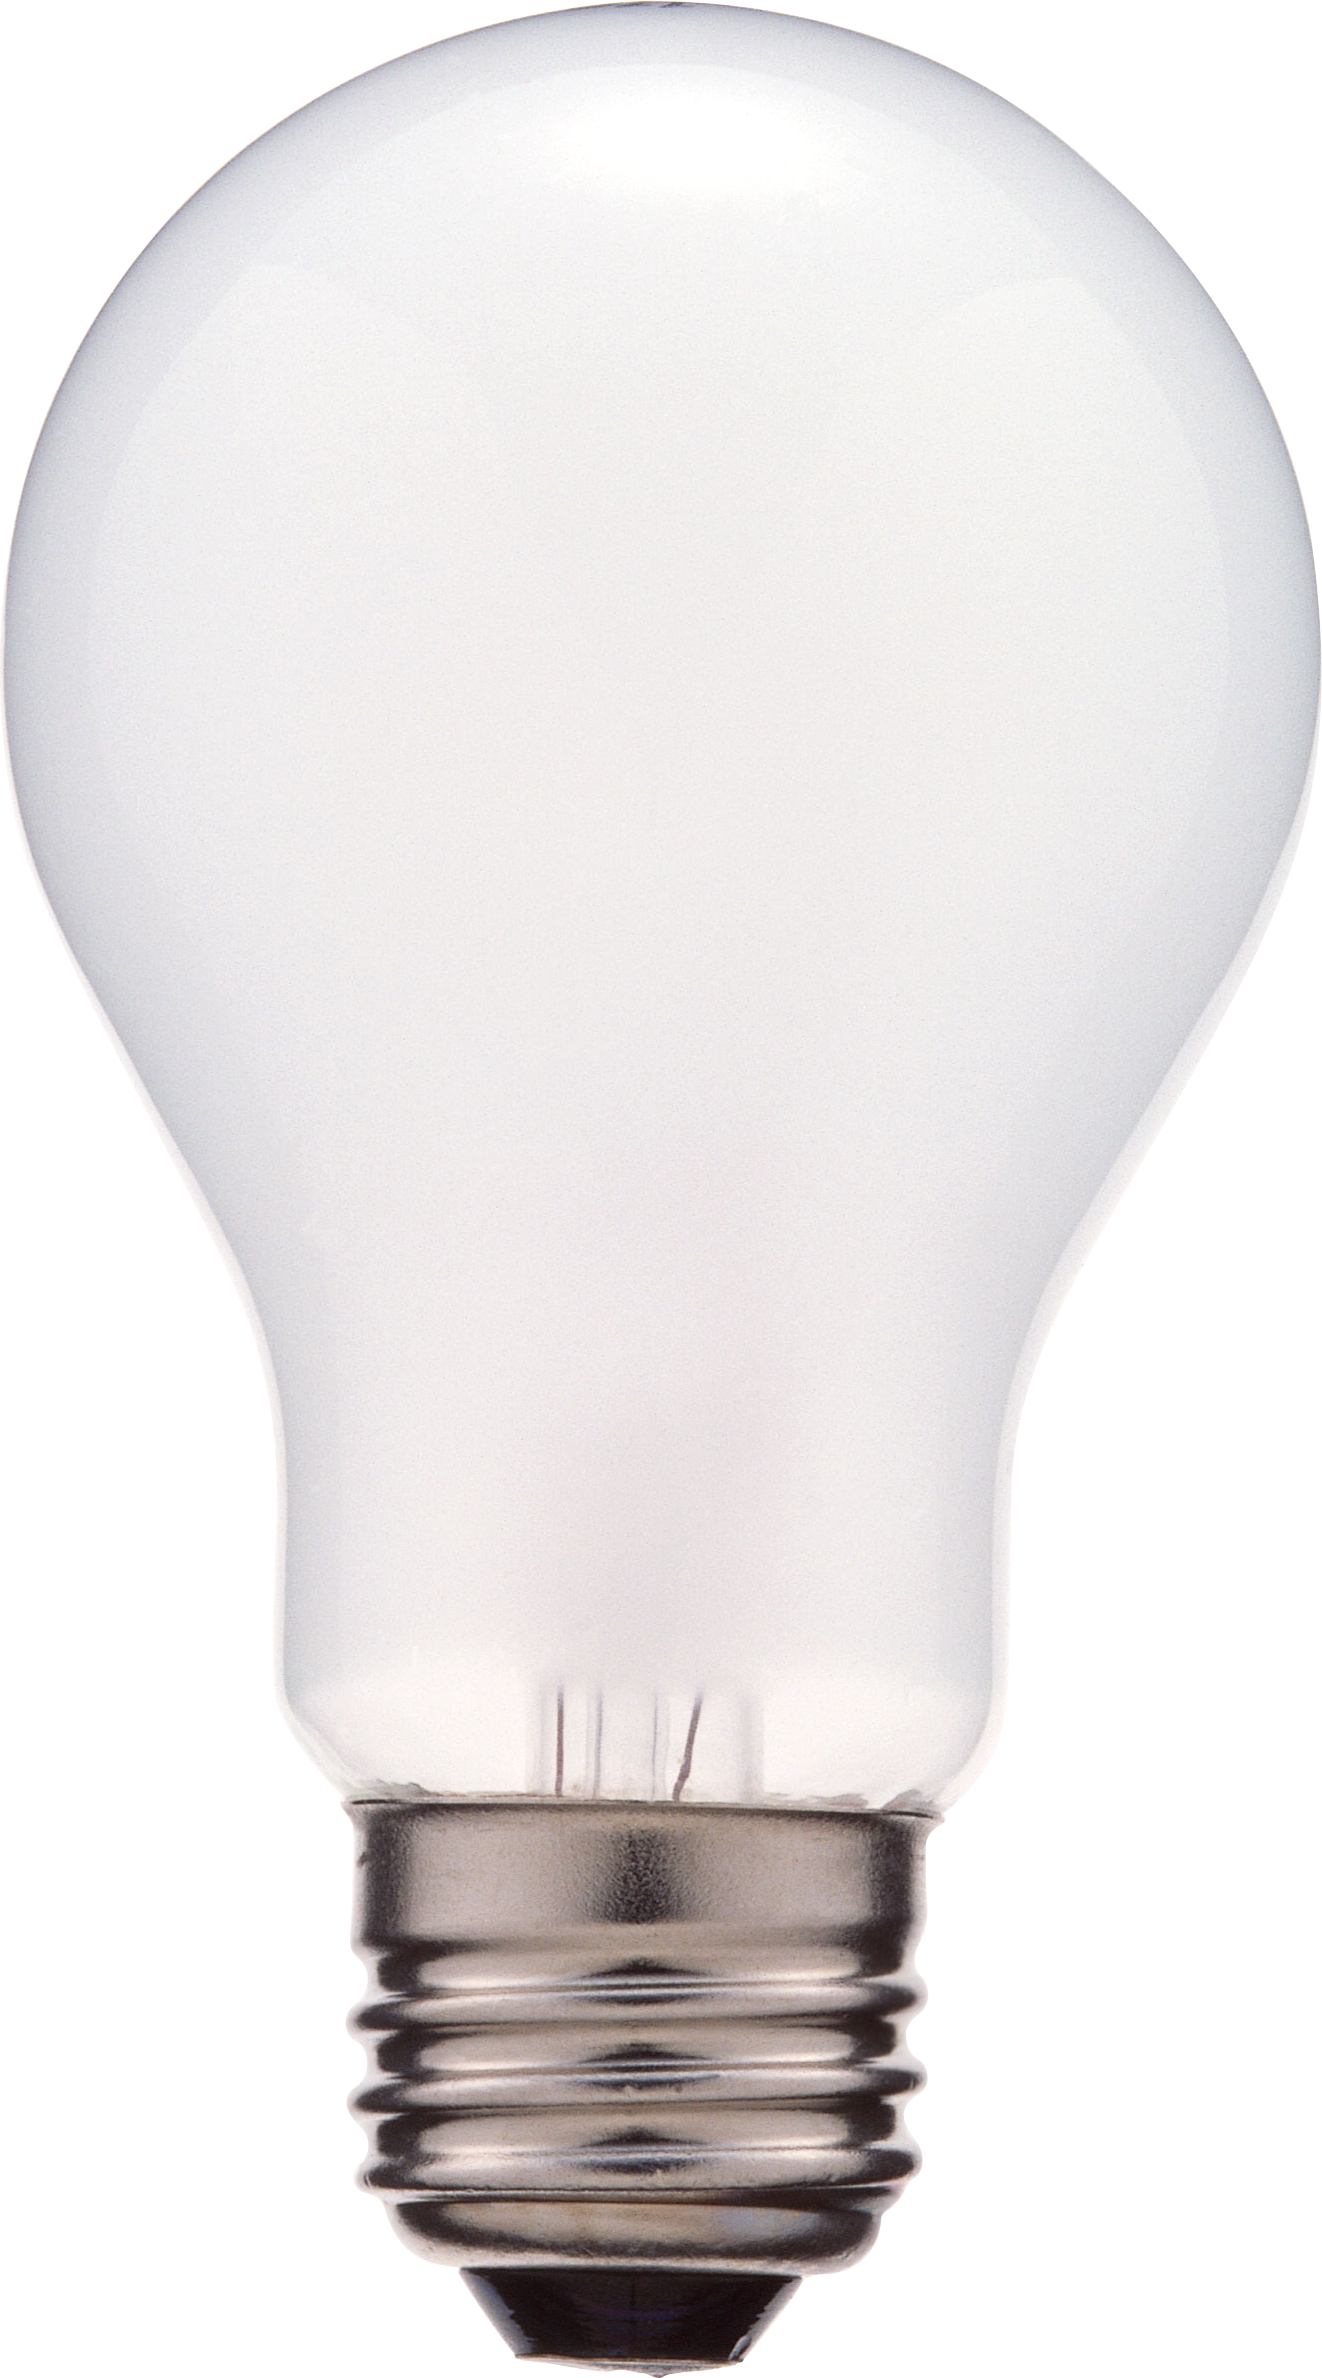 white bulb PNG